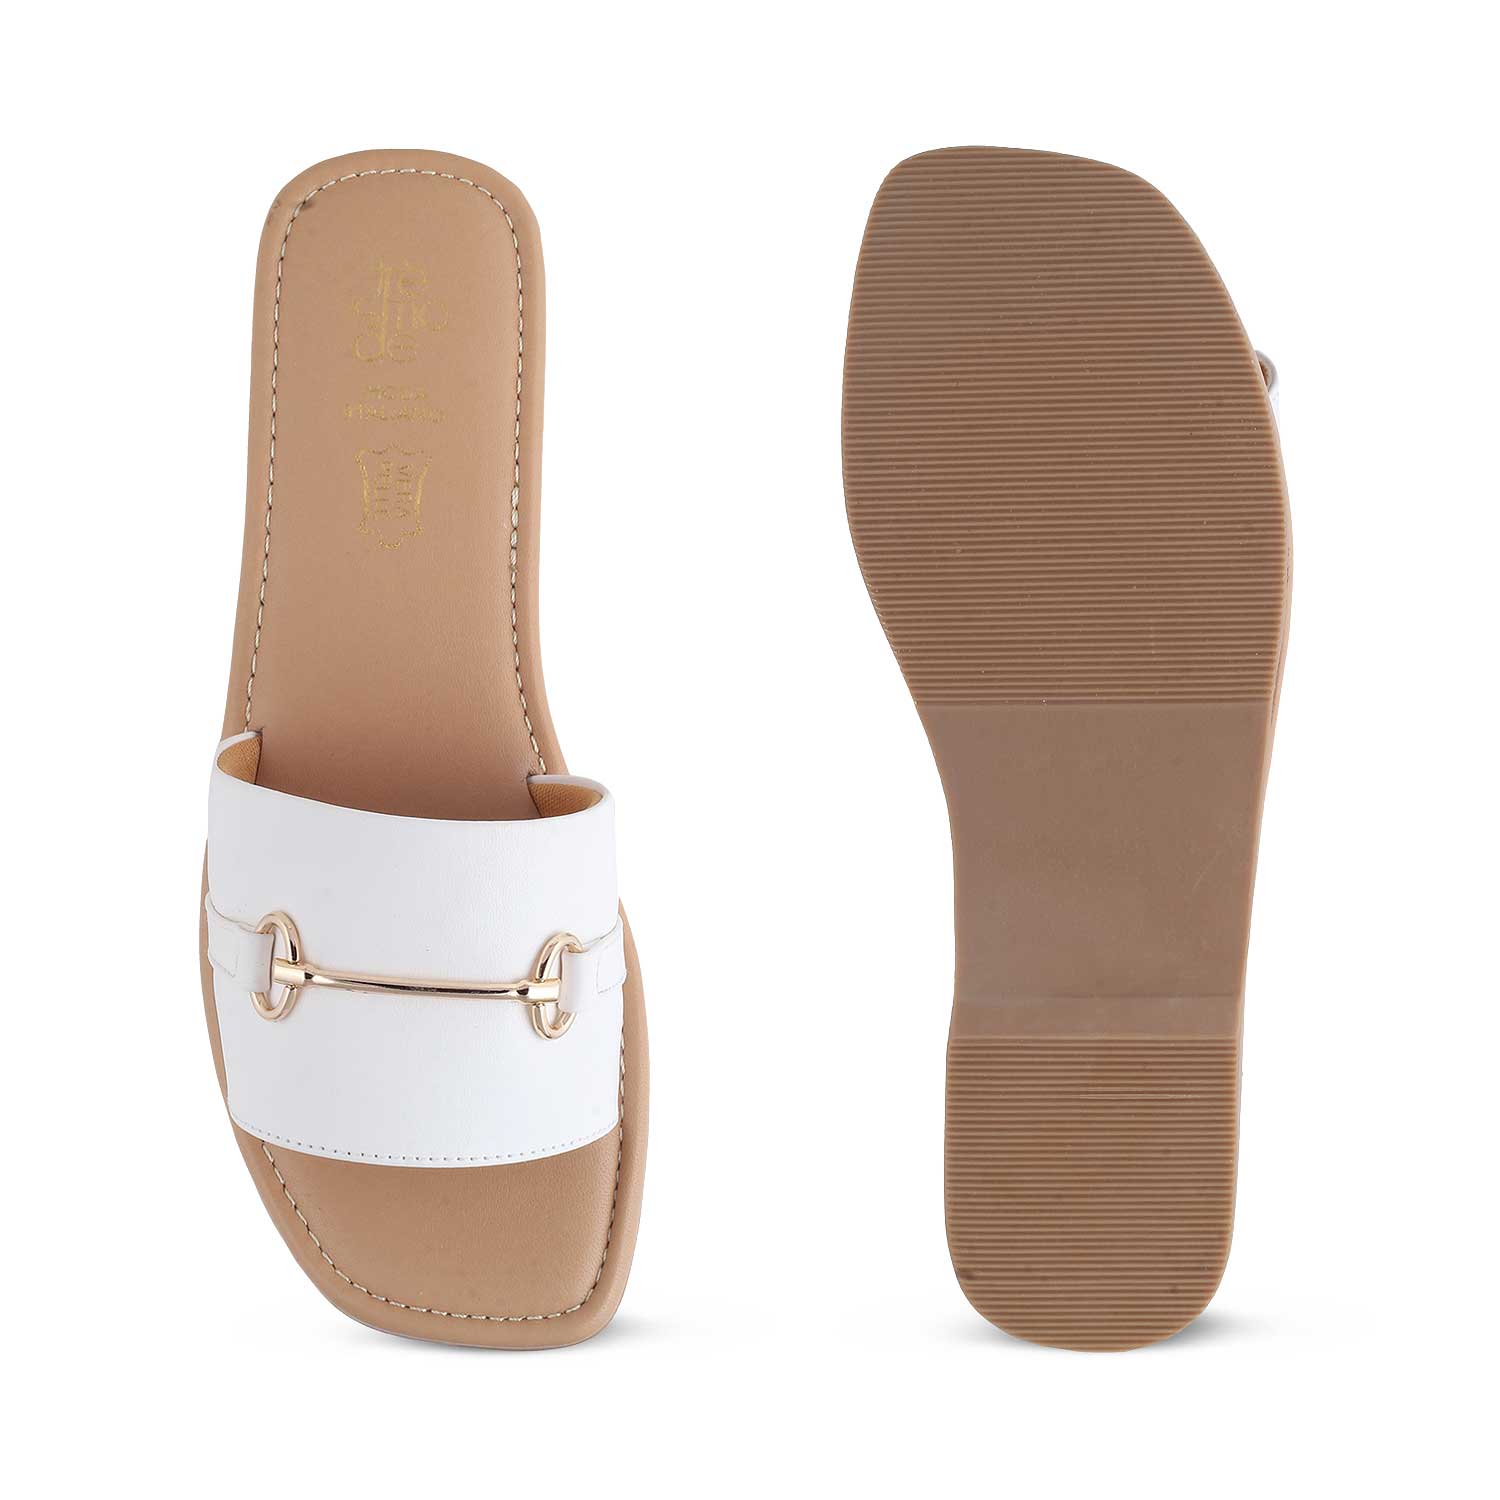 The Cafi White Women's Casual Flats Tresmode